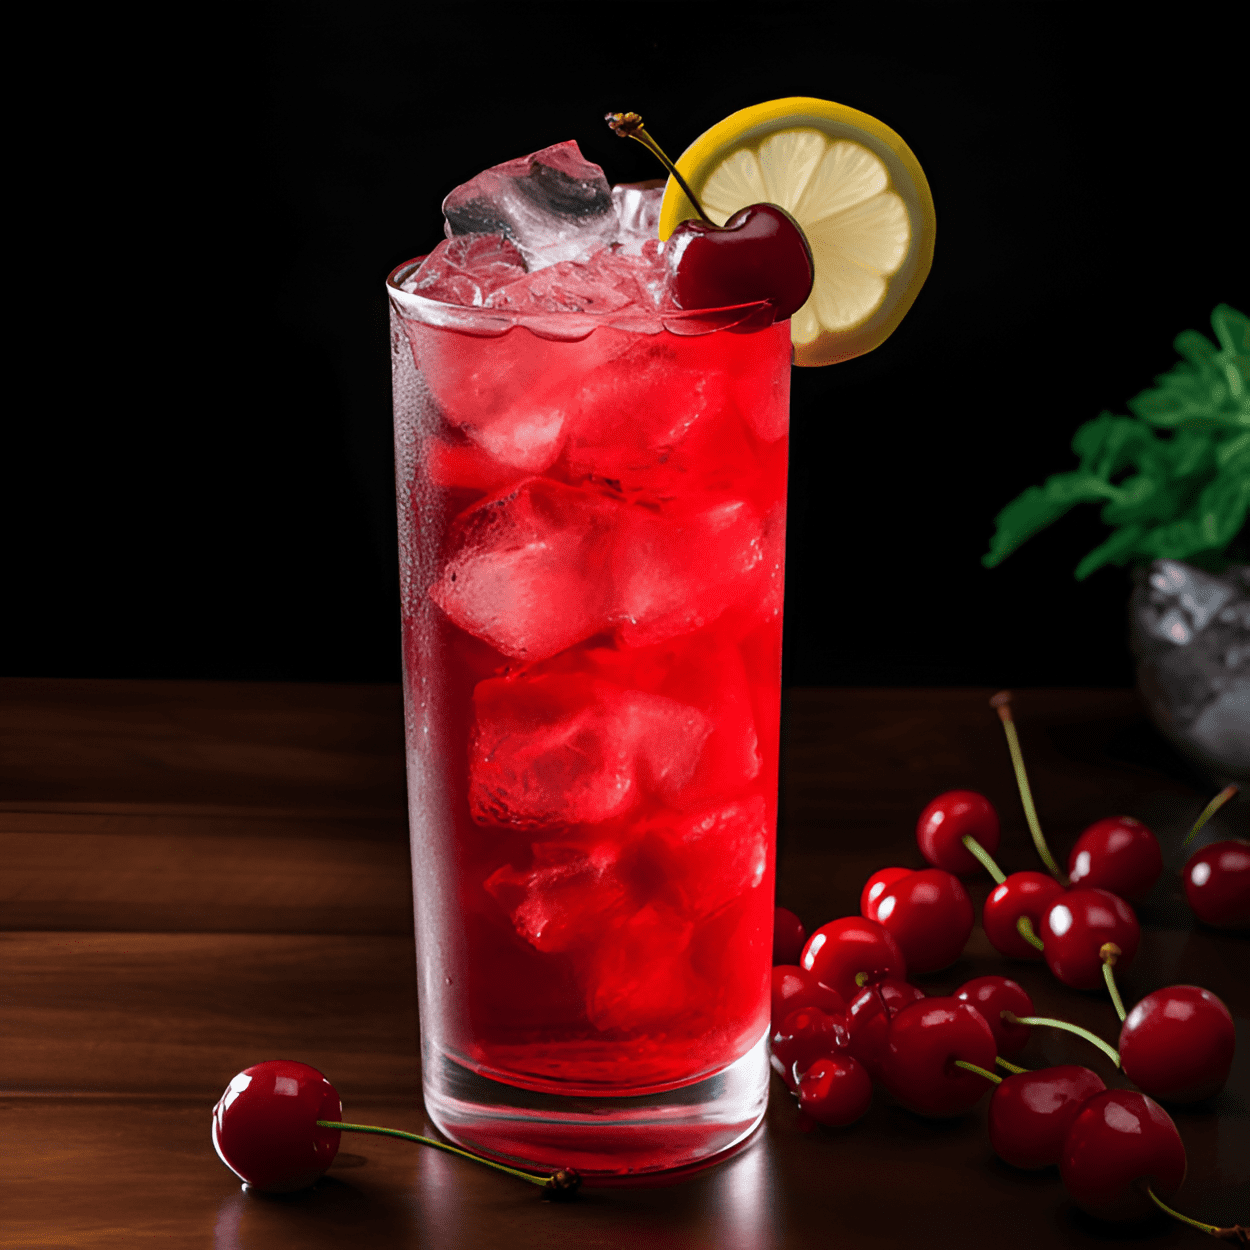 Red Berry Cocktail Recipe - The Red Berry Cocktail is a sweet, tangy, and slightly tart cocktail. It has a refreshing, fruity flavor with a hint of citrus. The sweetness of the berries is perfectly balanced by the tartness of the lemon, creating a delightful and invigorating taste.